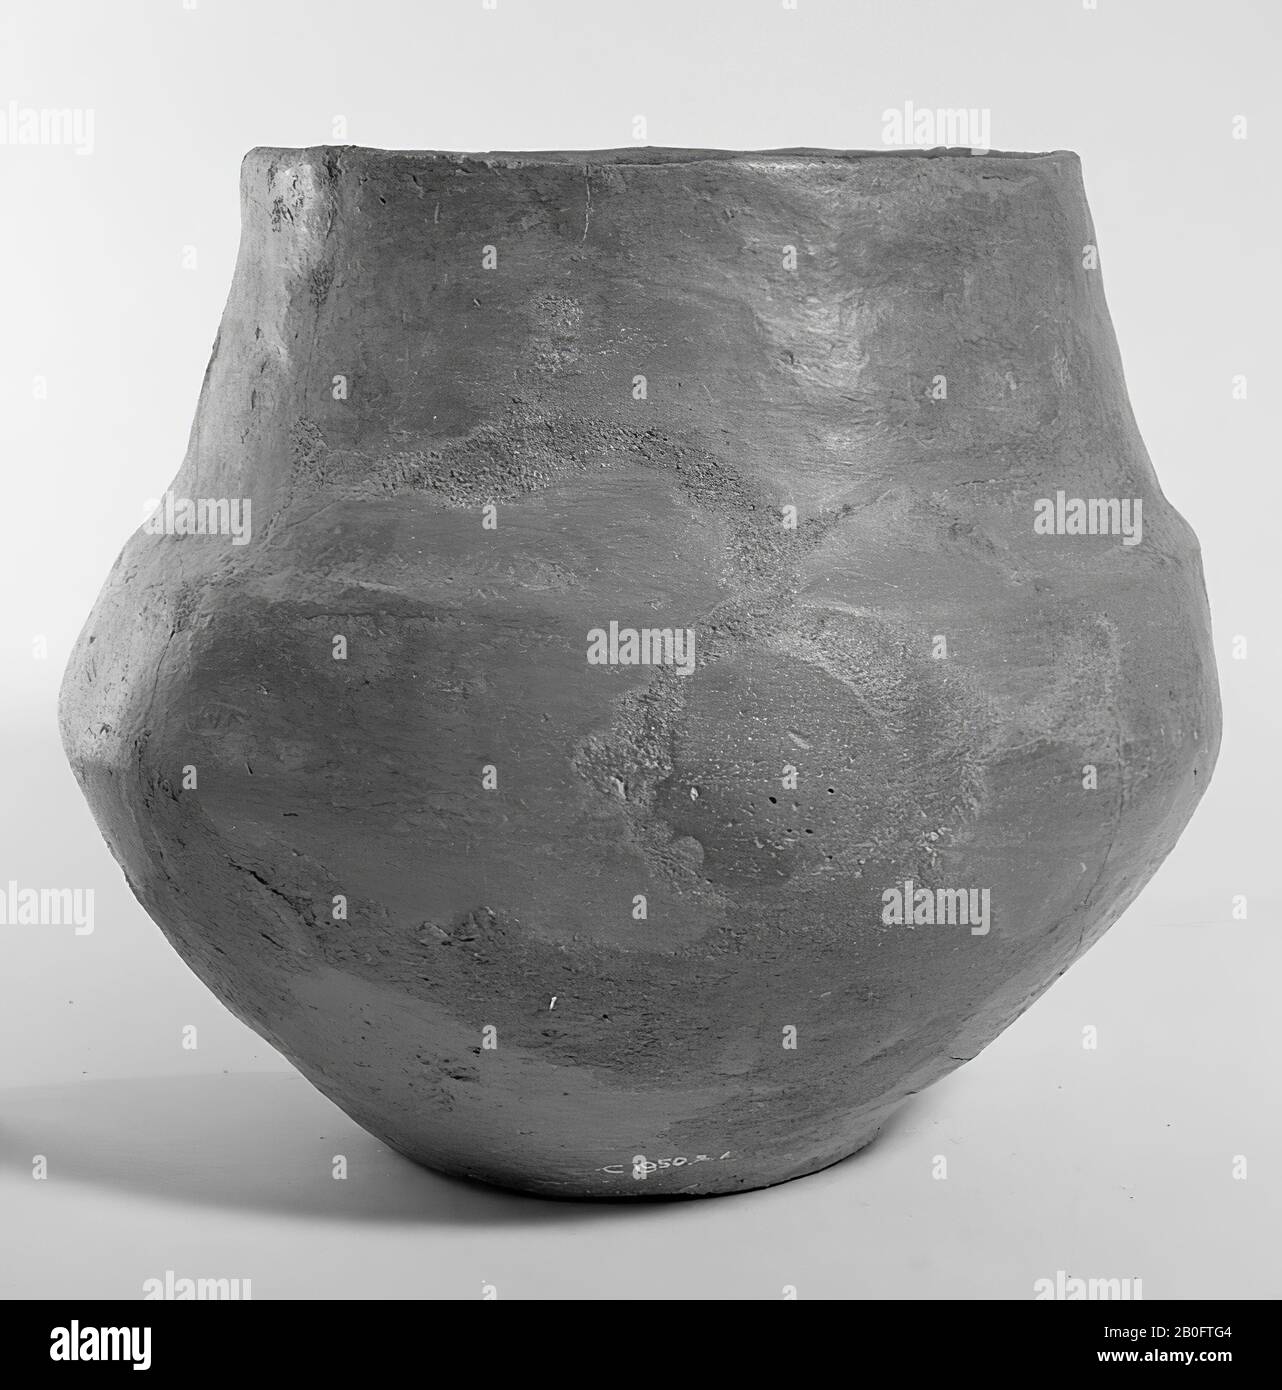 Double conical urn of earthenware with accentuated shoulder. Old bondings and additions, surface damage. Contains cremated residues, urn, earthenware, h: 17,5 cm, diam: 20,5 cm, prehistory -1200 Stock Photo